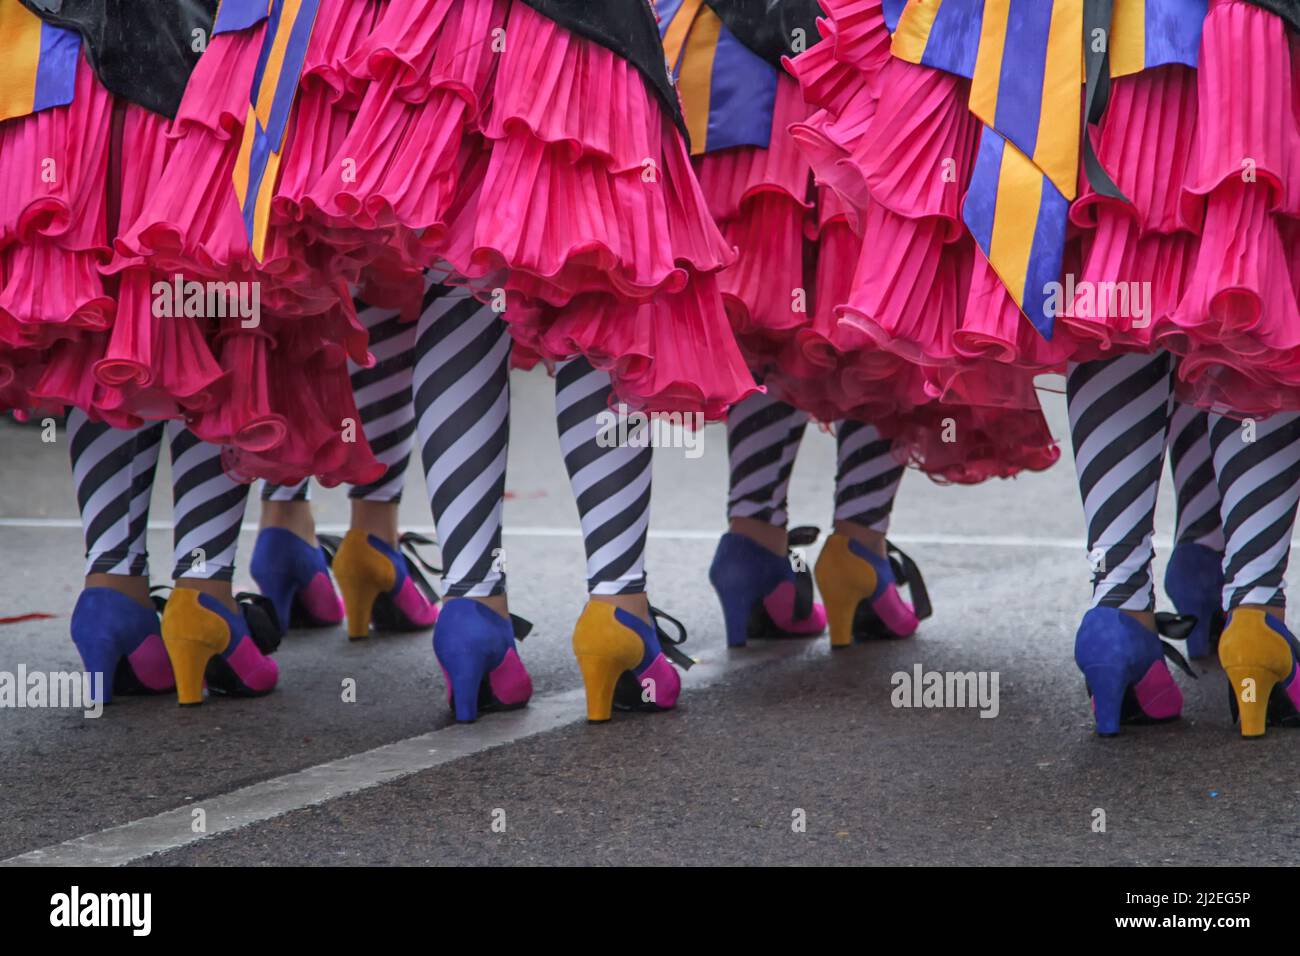 Portugal Carnaval Ovar - Pink frilly skirts, stripey legs and colourful shoes - Amor ao Rubro - Love on Fire - Grupo Passerelle - Bailarinos de Válega Stock Photo